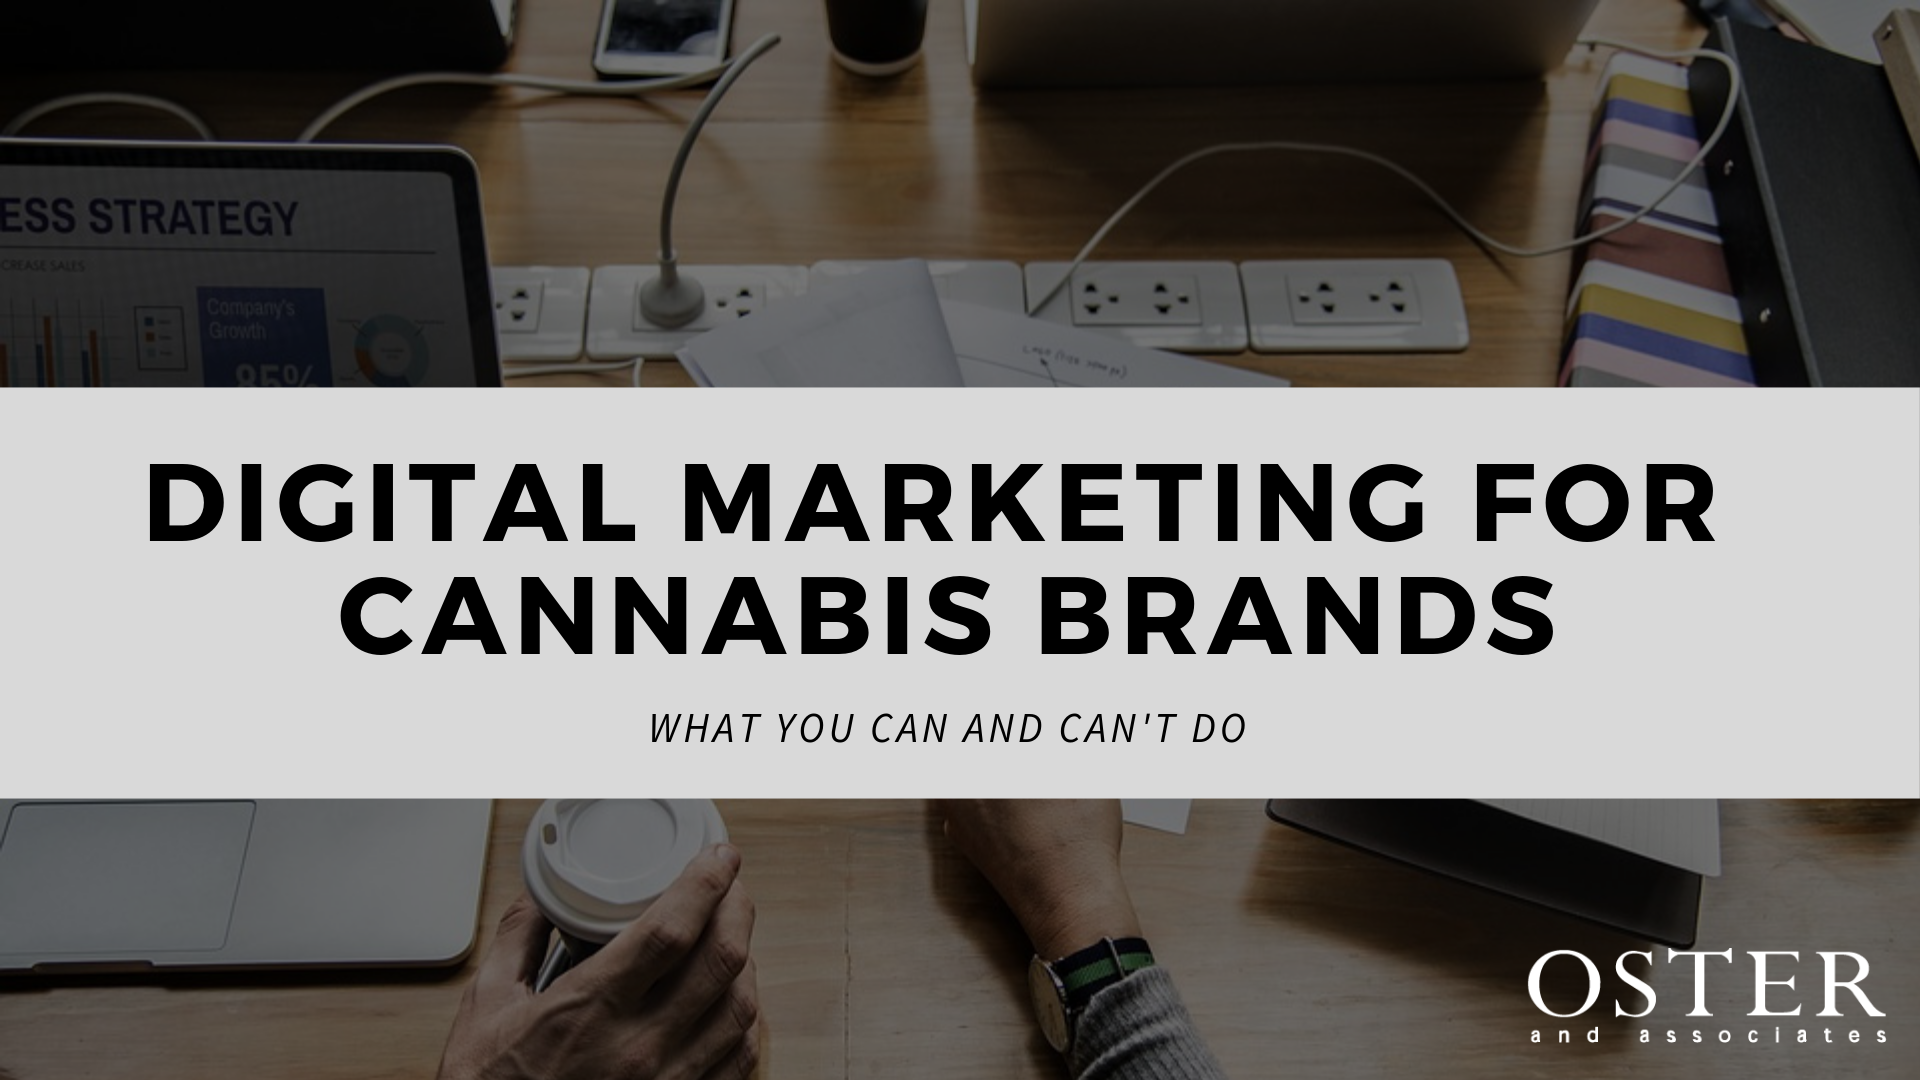 Digital marketing for cannabis brands - what you can and can't do